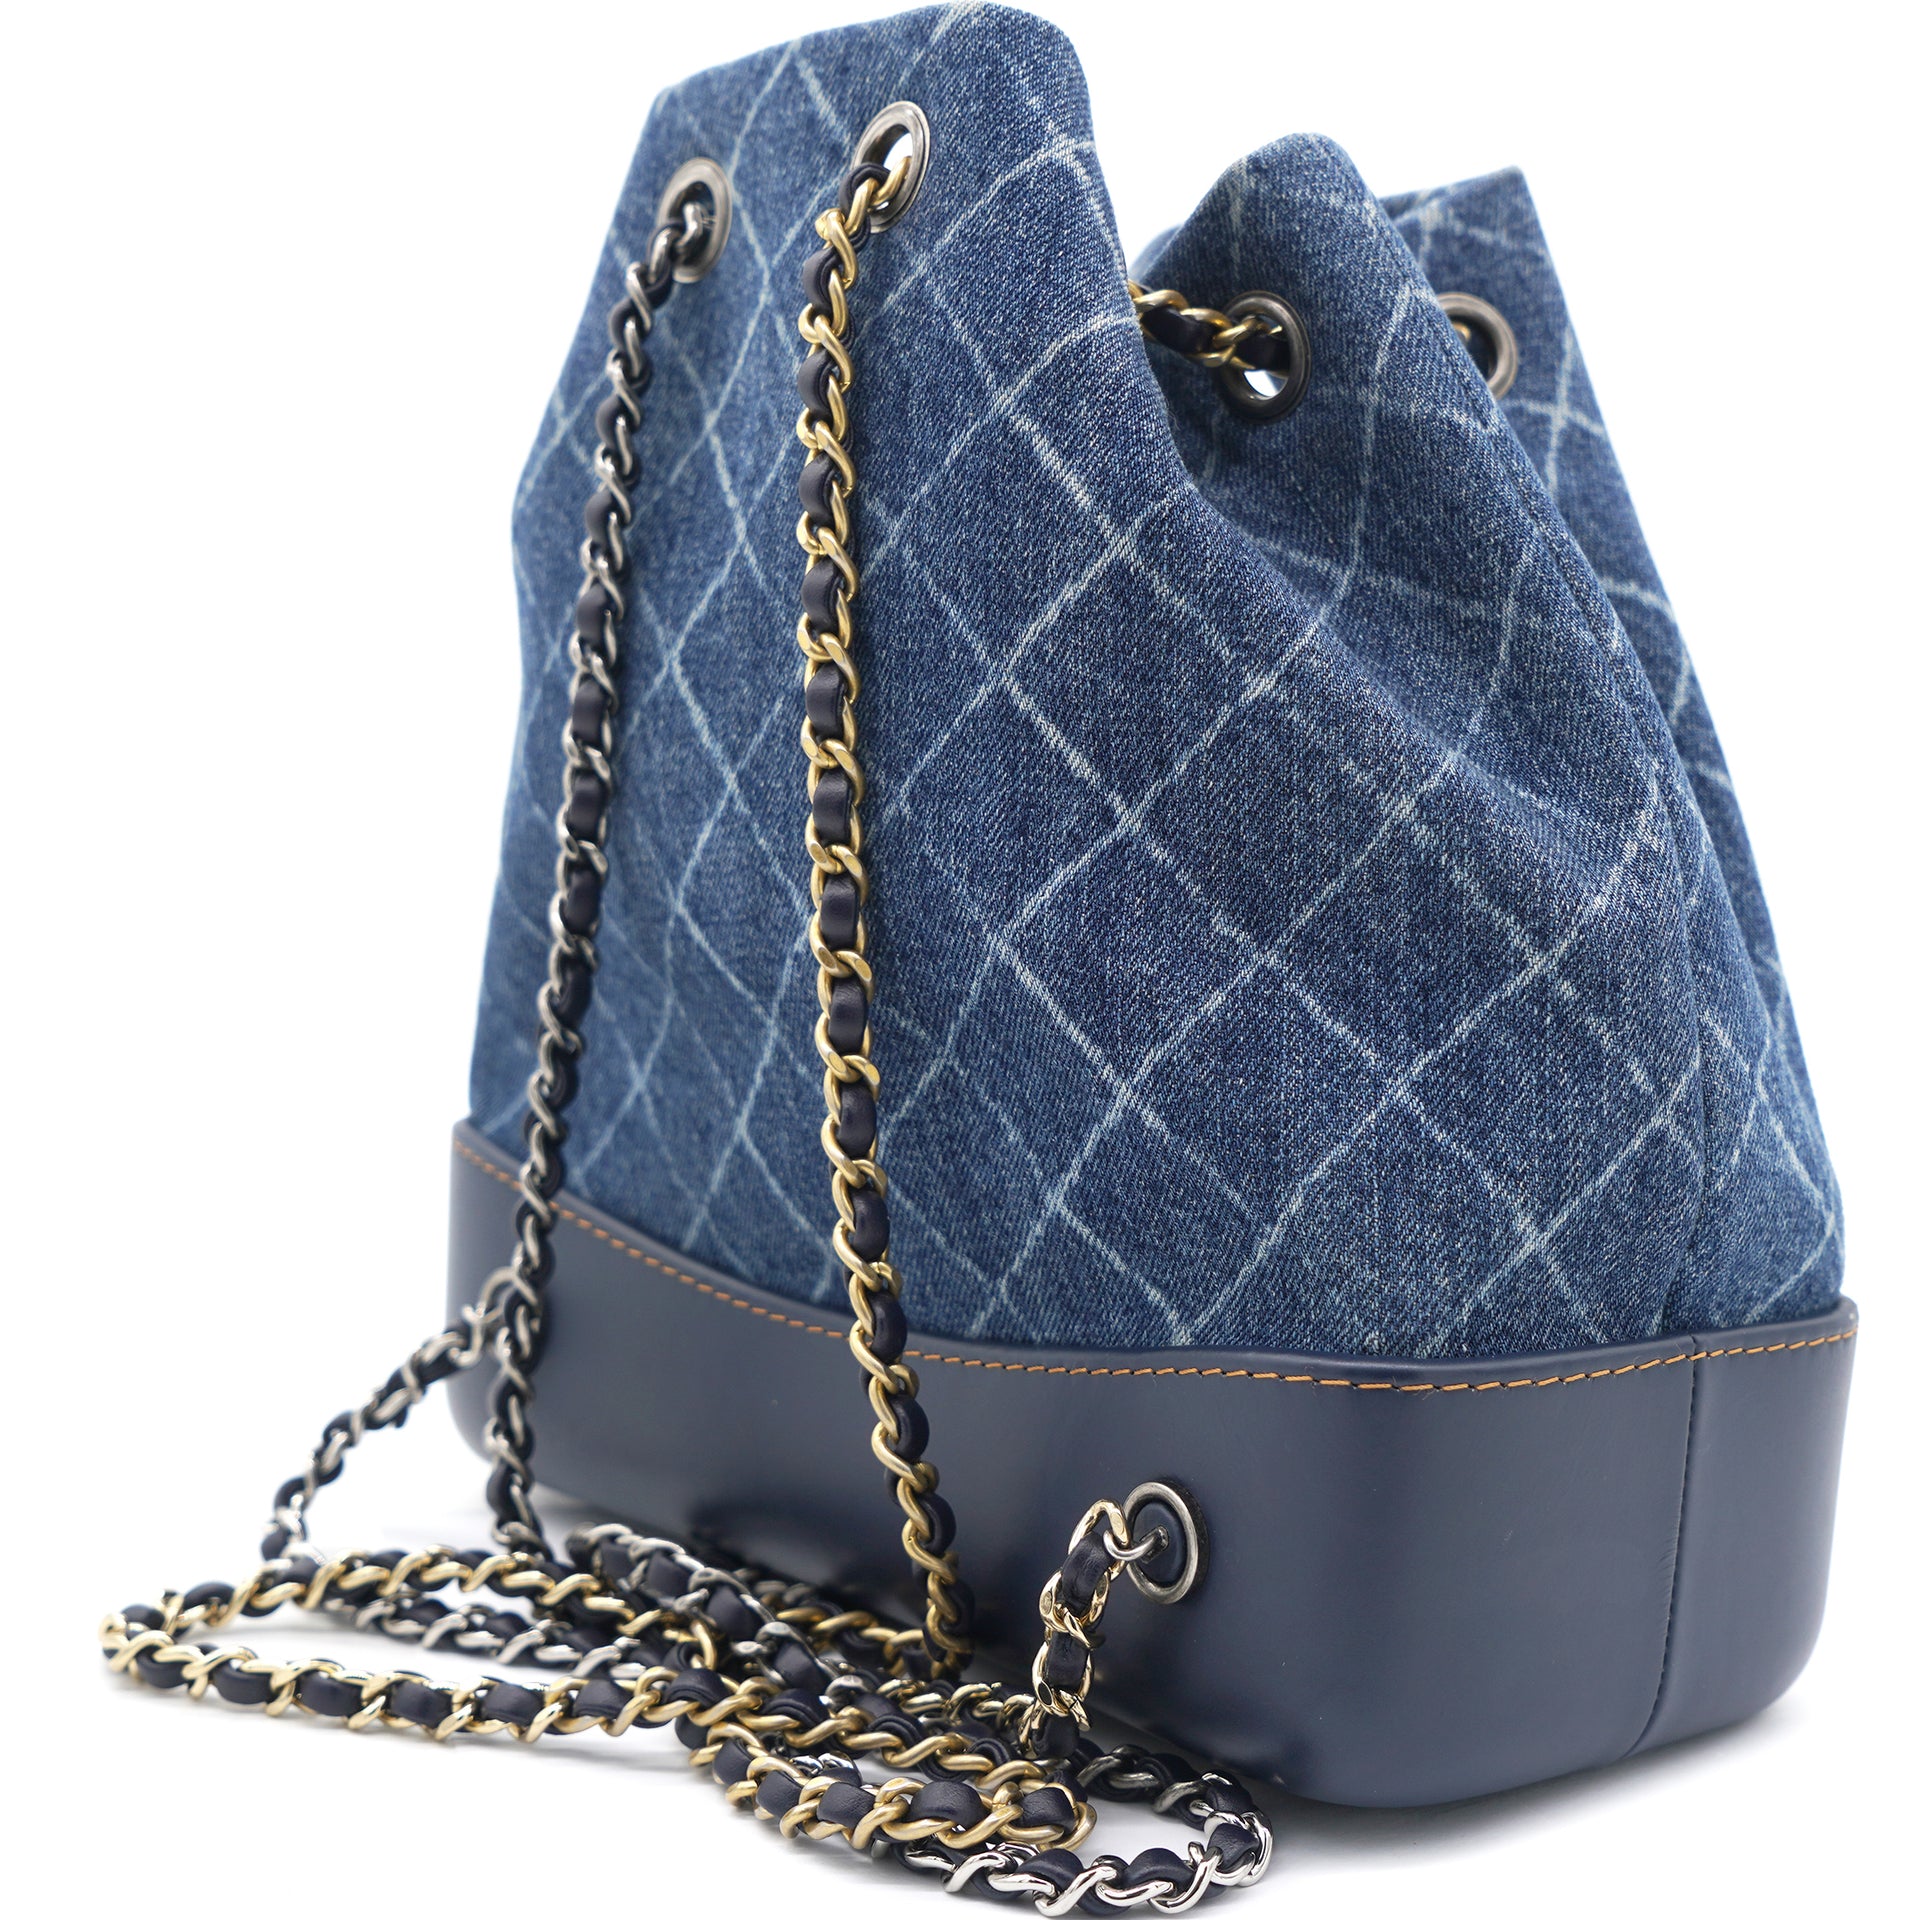 Gabrielle Backpack in Denim/Blue Leather